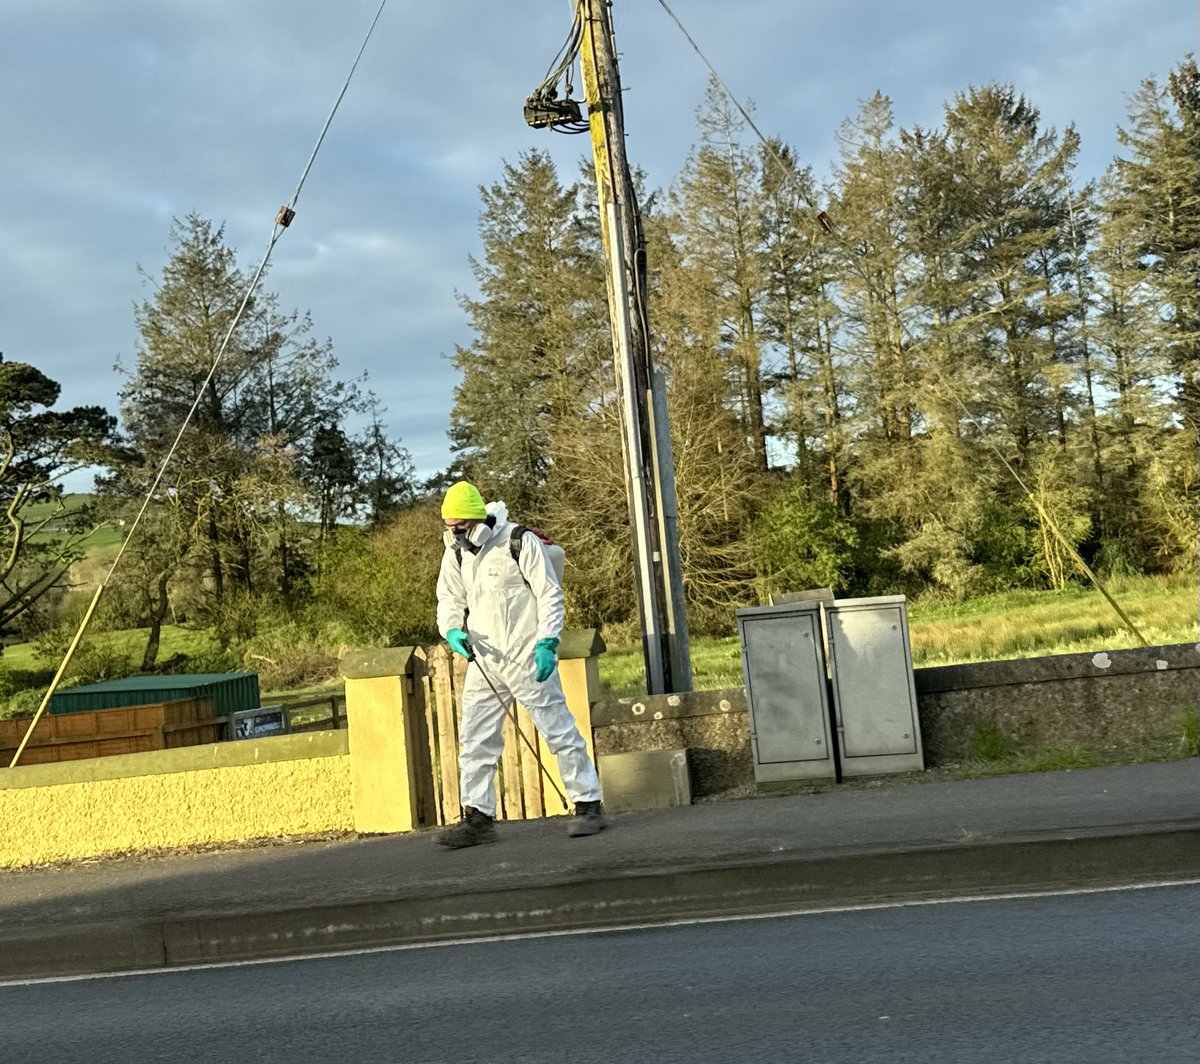 What a bizarre sight in Kilmeaden. The chemicals are so toxic a full on protective suit is needed. Who cares about the person passing by walking their dog or the children getting their bus to school? All to kill some moss & wildflowers. Hope it doesn’t get into the water! 1/